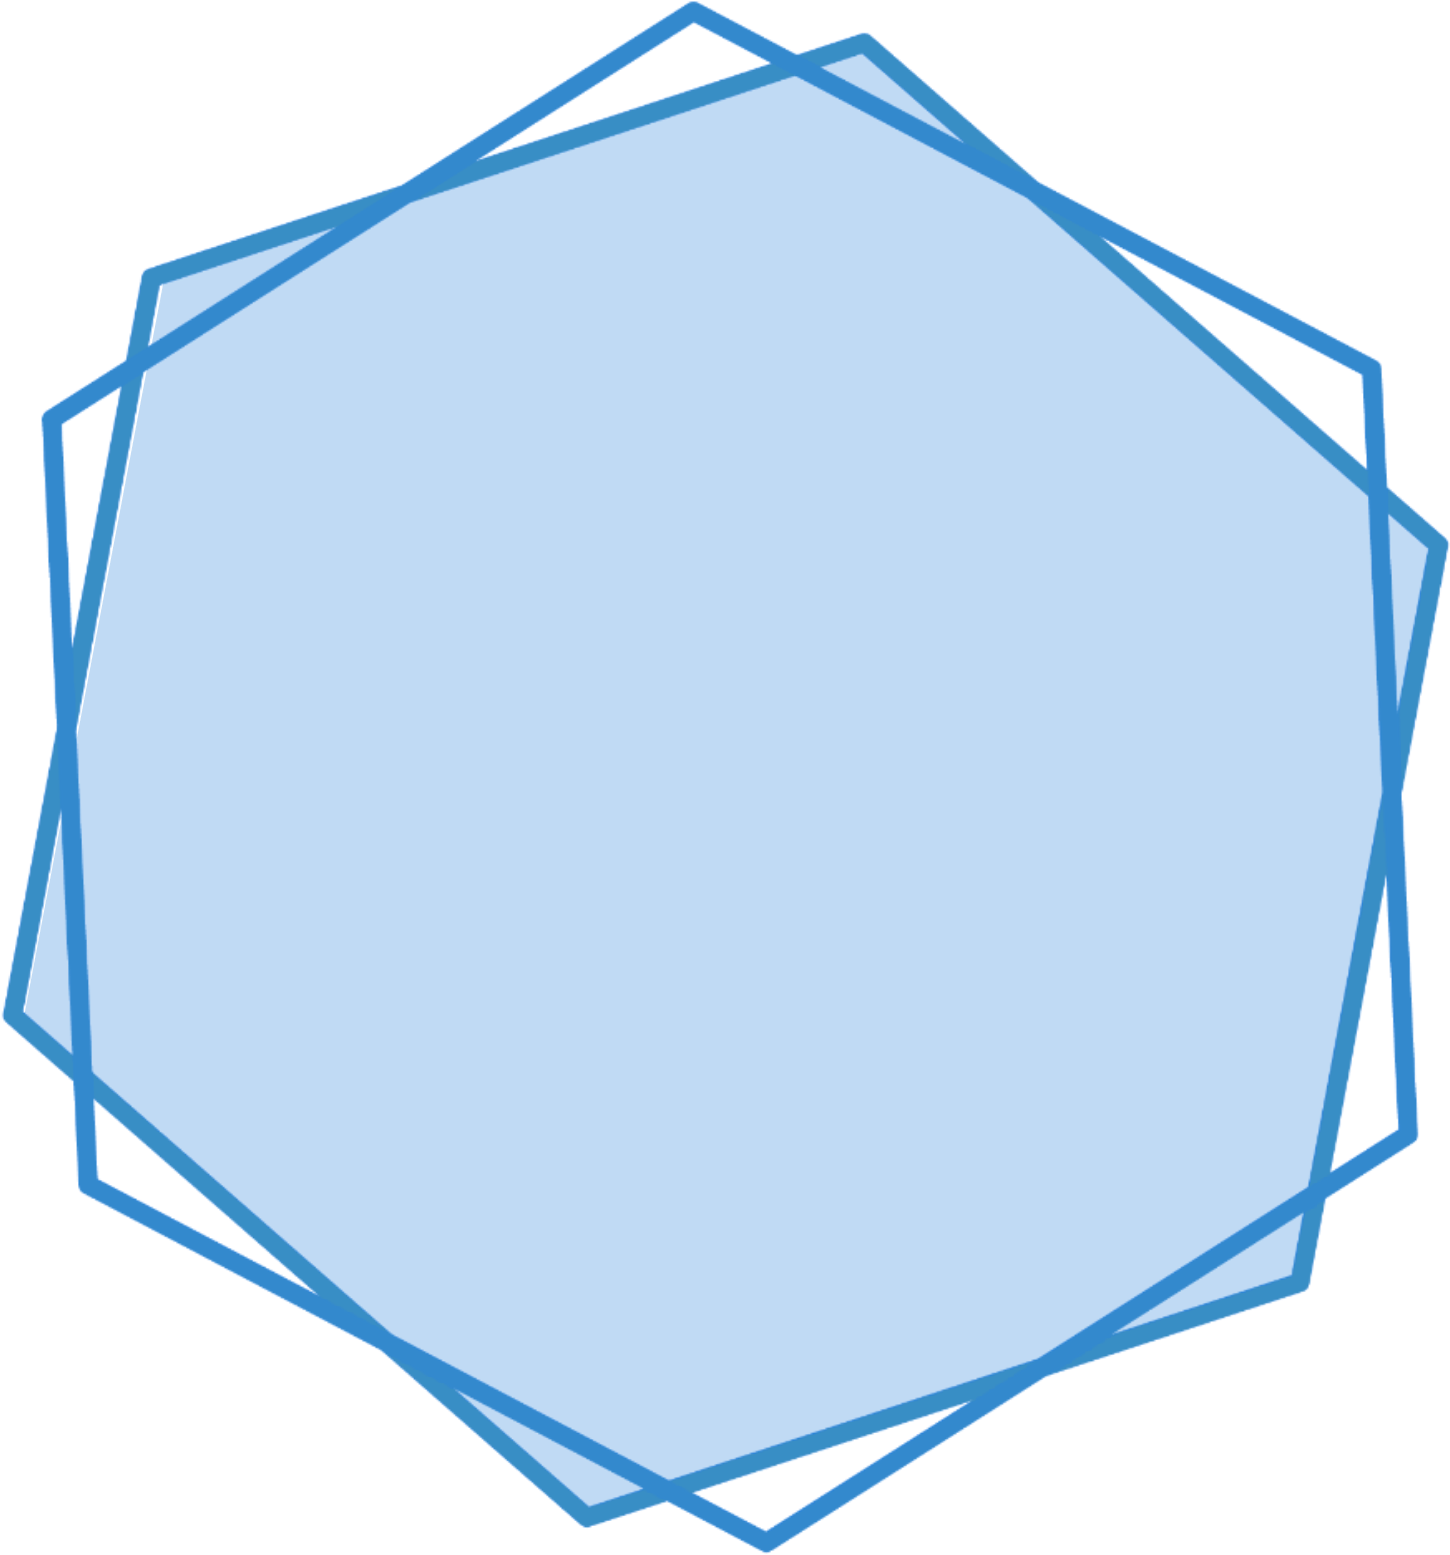 Abstract Blue Pentagon Overlay PNG